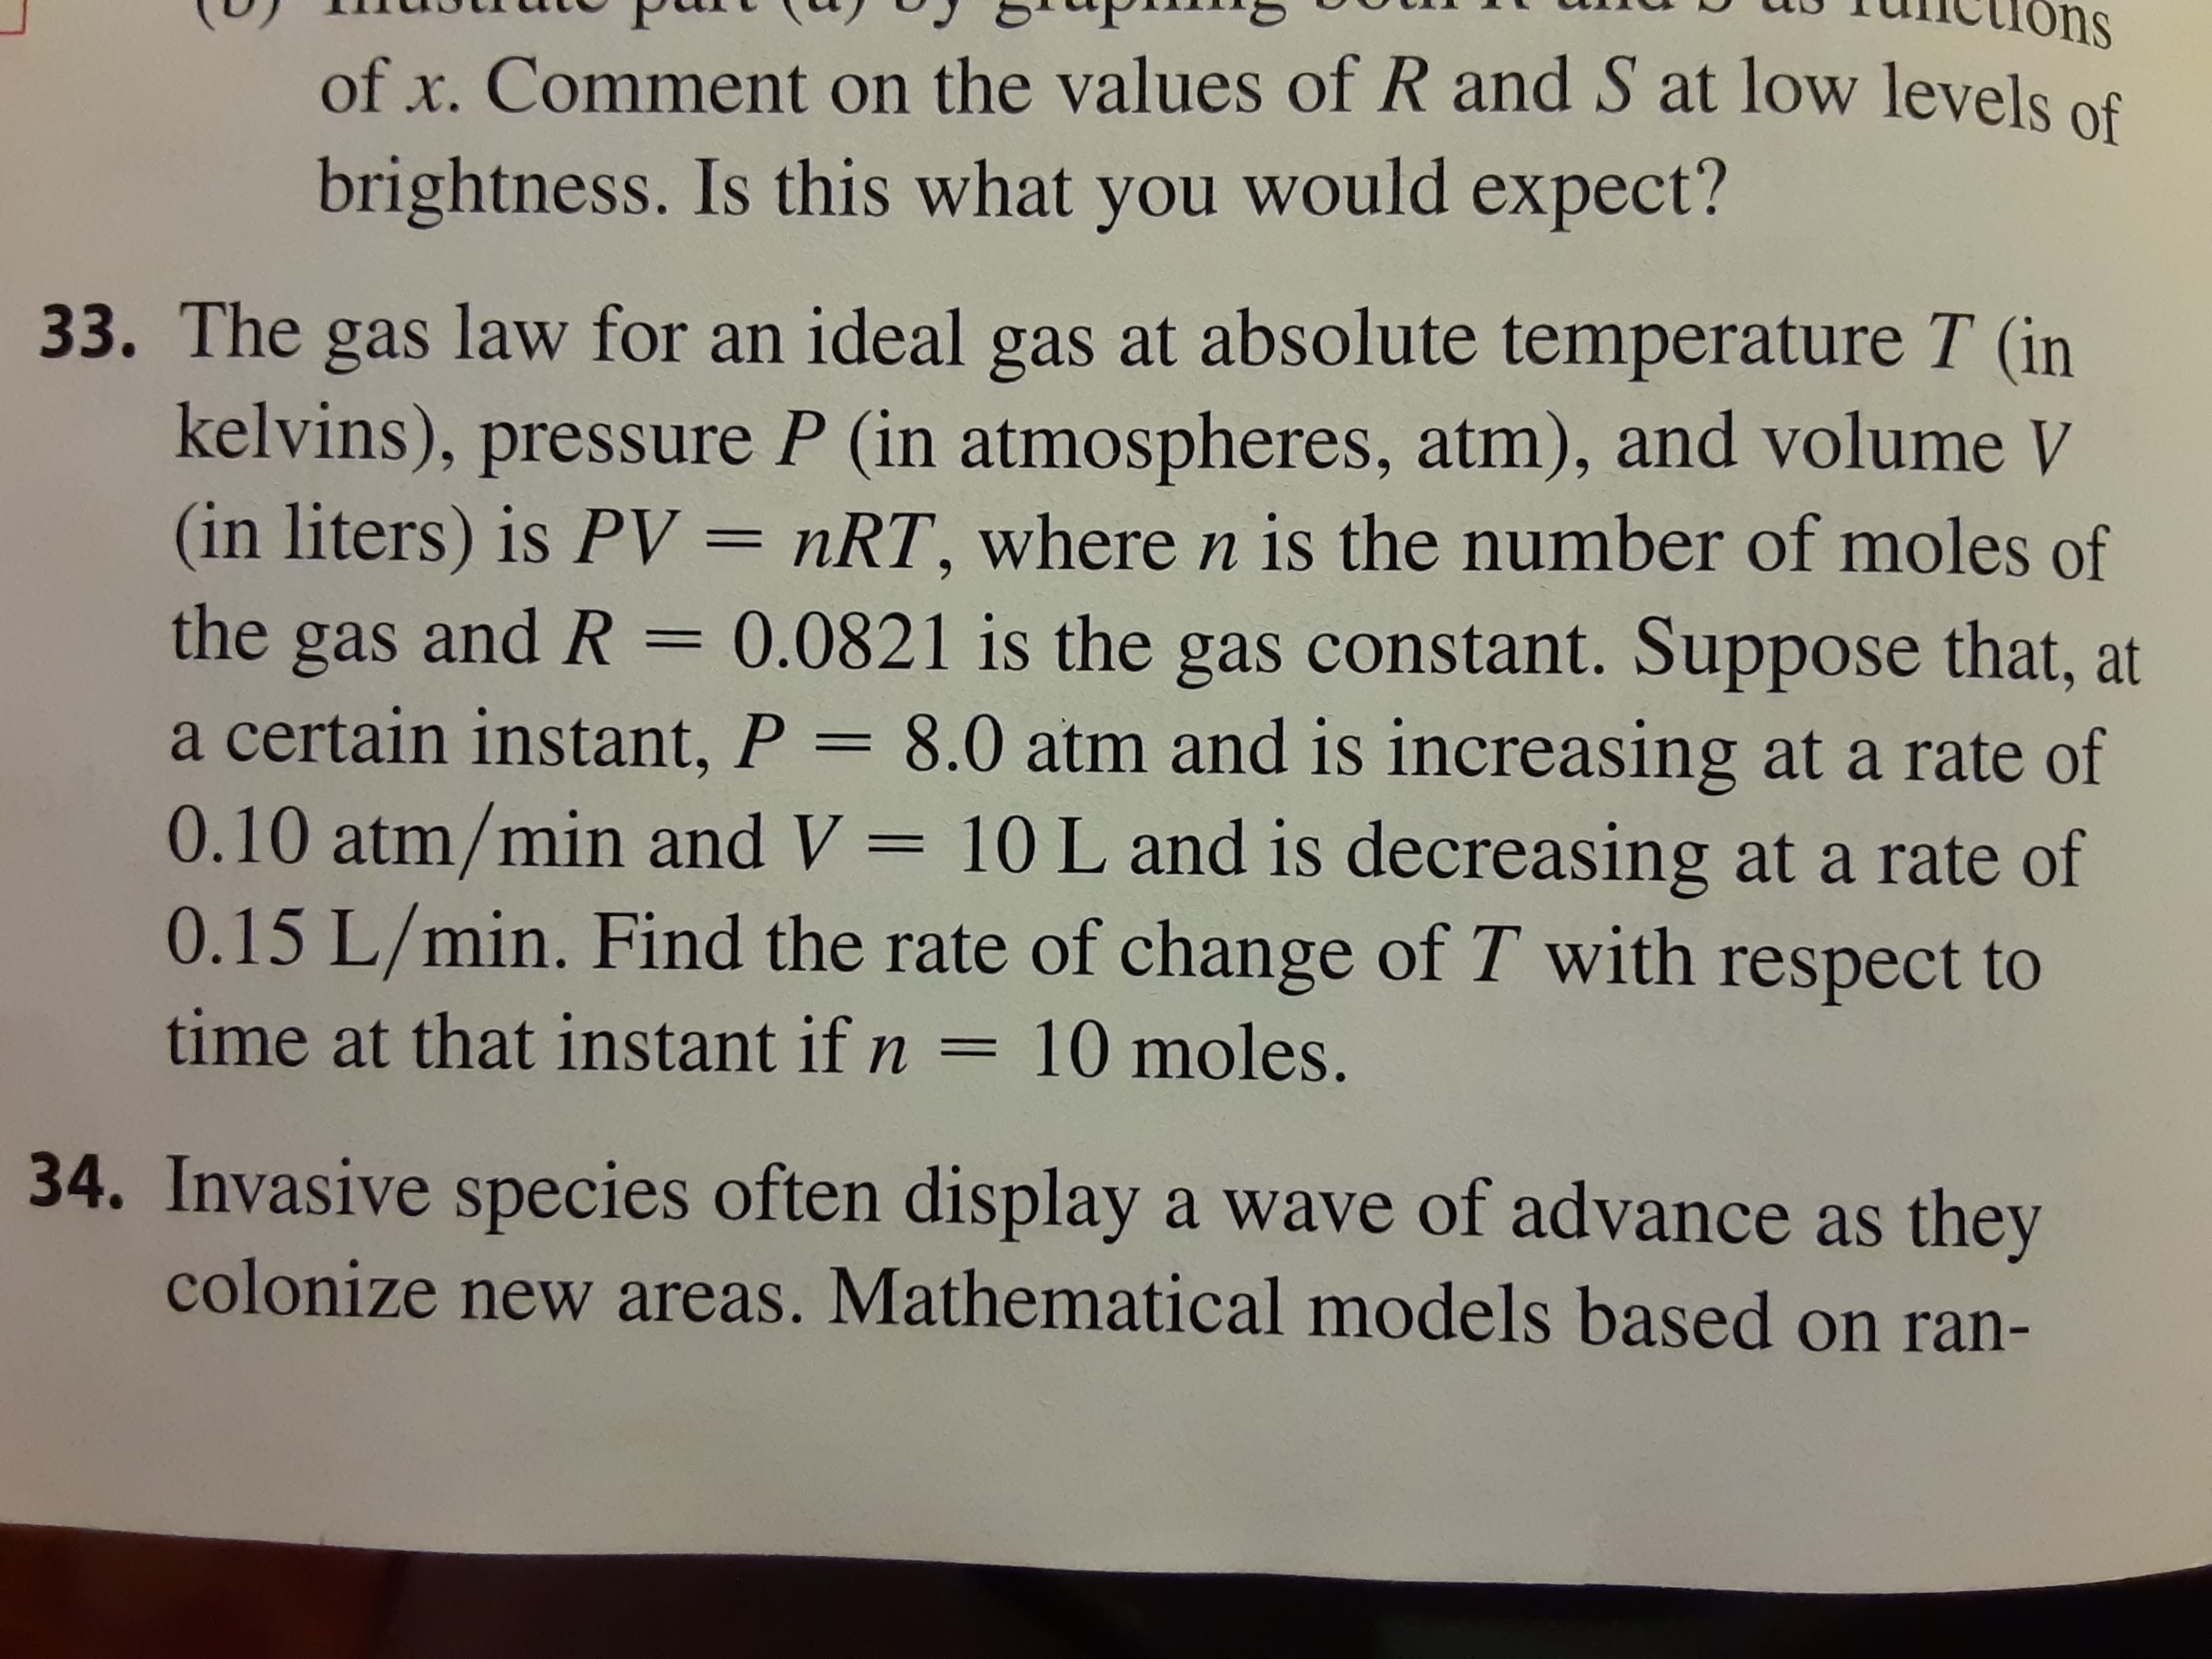 The gas law for an ideal gas at absolute temperature T (in
kelvins), pressure P (in atmospheres, atm), and volume V
(in liters) is PV = nRT, where n is the number of moles of
gas and R = 0.0821 is the gas constant. Suppose that, at
a certain instant, P = 8.0 atm and is increasing at a rate of
0.10 atm/min and V = 10 L and is decreasing at a rate of
0.15 L/min. Find the rate of change of T with respect to
6.
the
I|
time at that instant if n = 10 moles.
